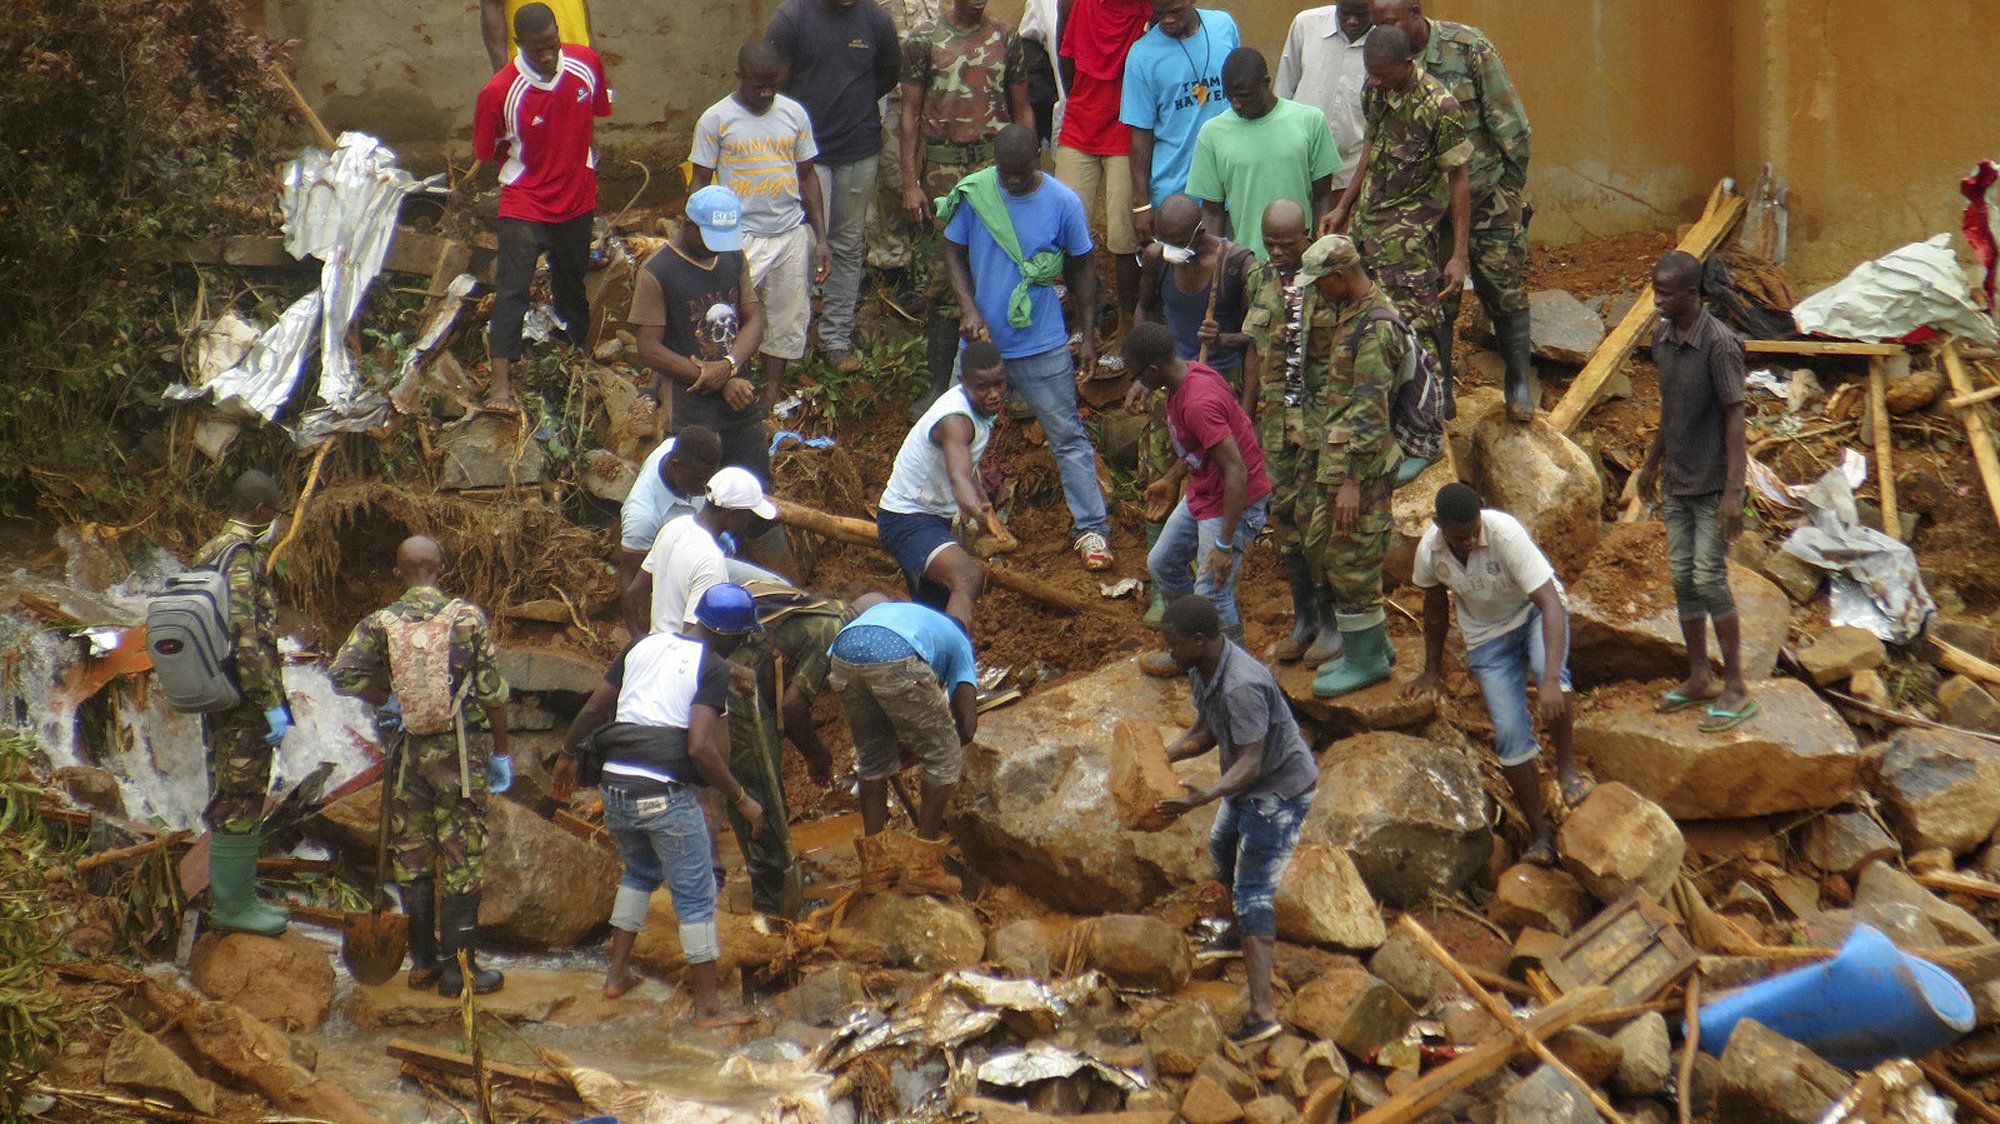 Over 400 Lives Lost In Sierra Leone